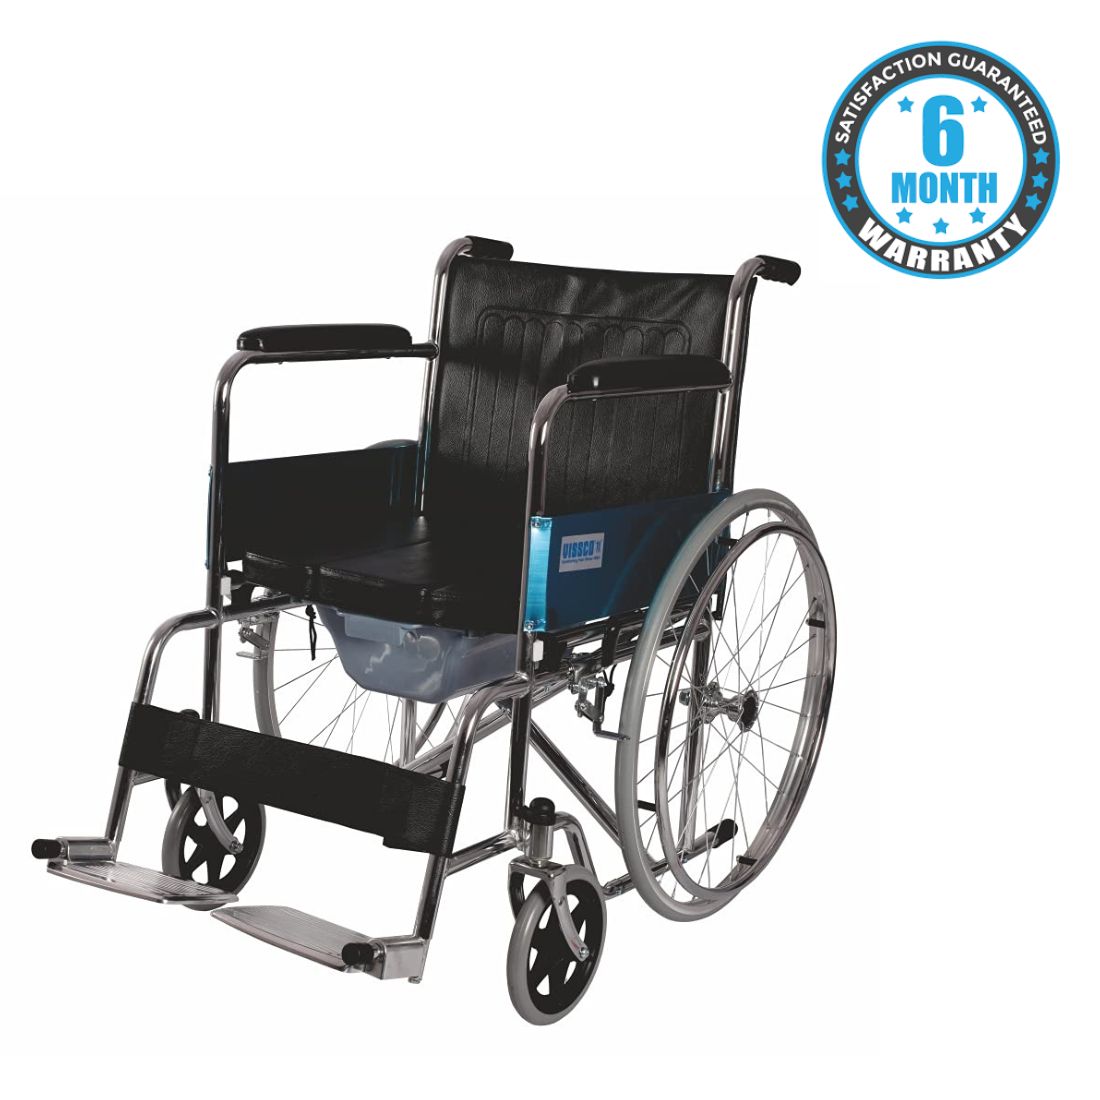 Folding Wheelchair with commode for best price in chennai